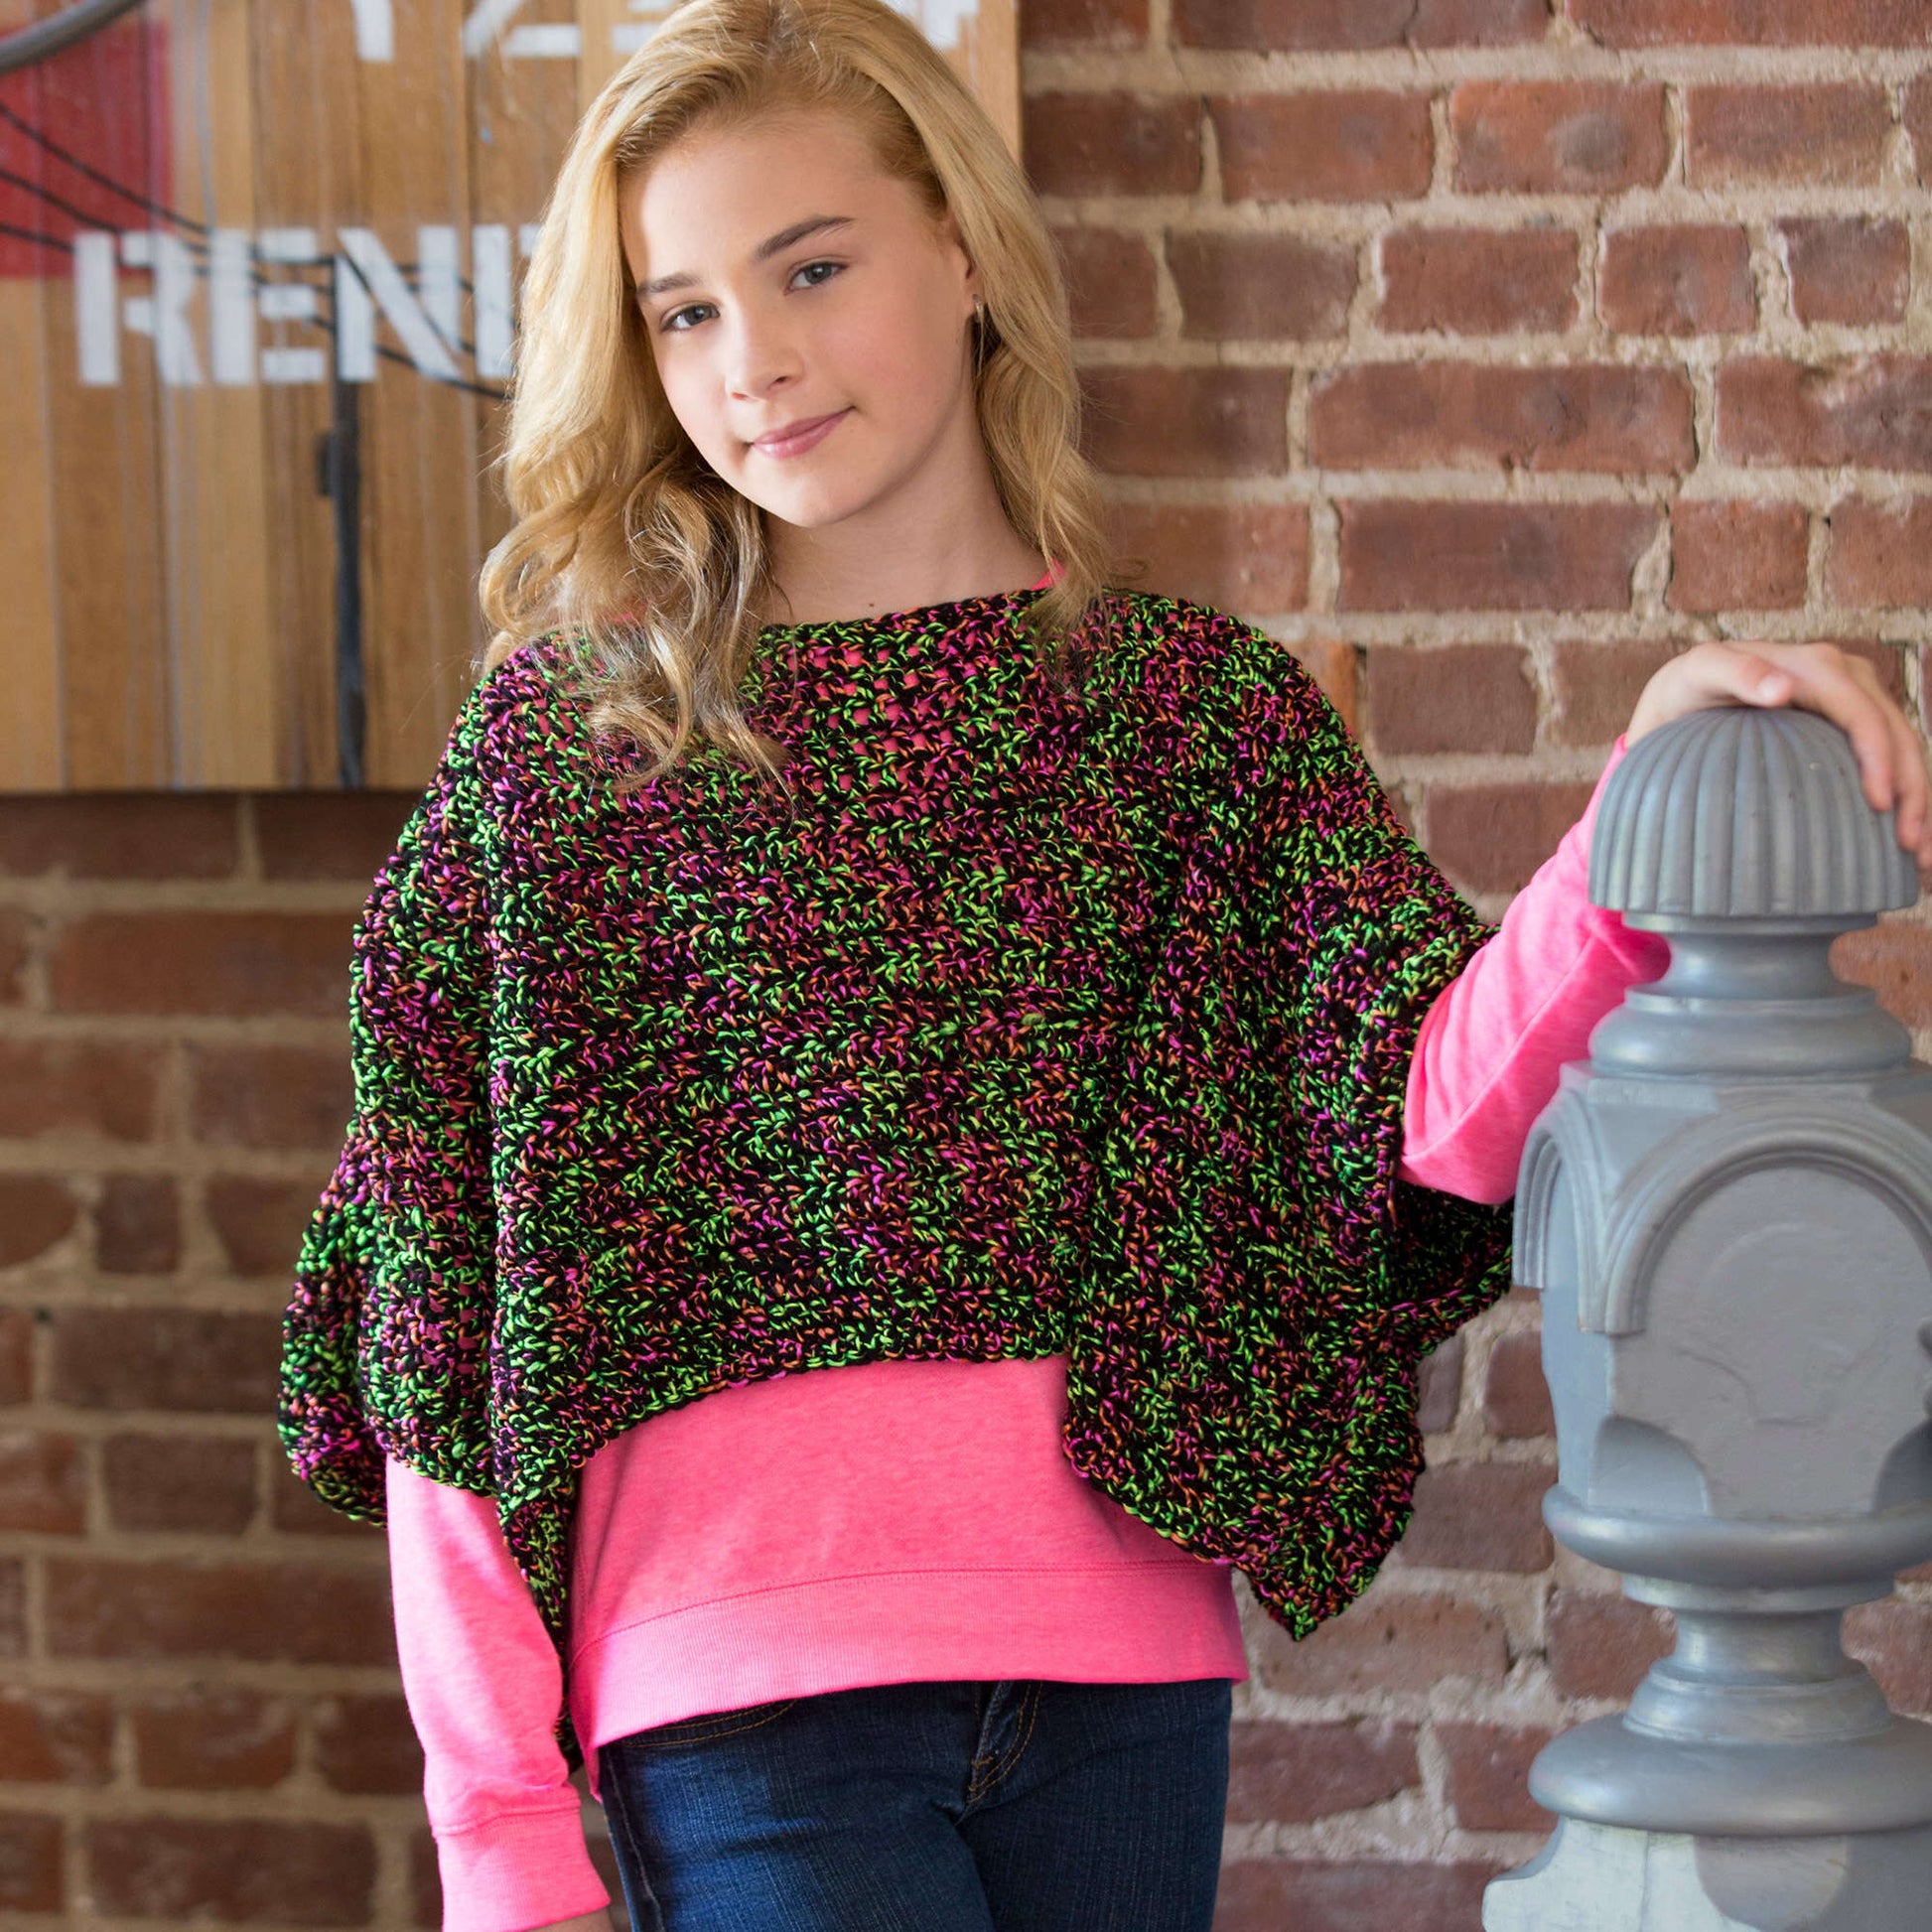 Free Red Heart Set The Trend Poncho Crochet Pattern